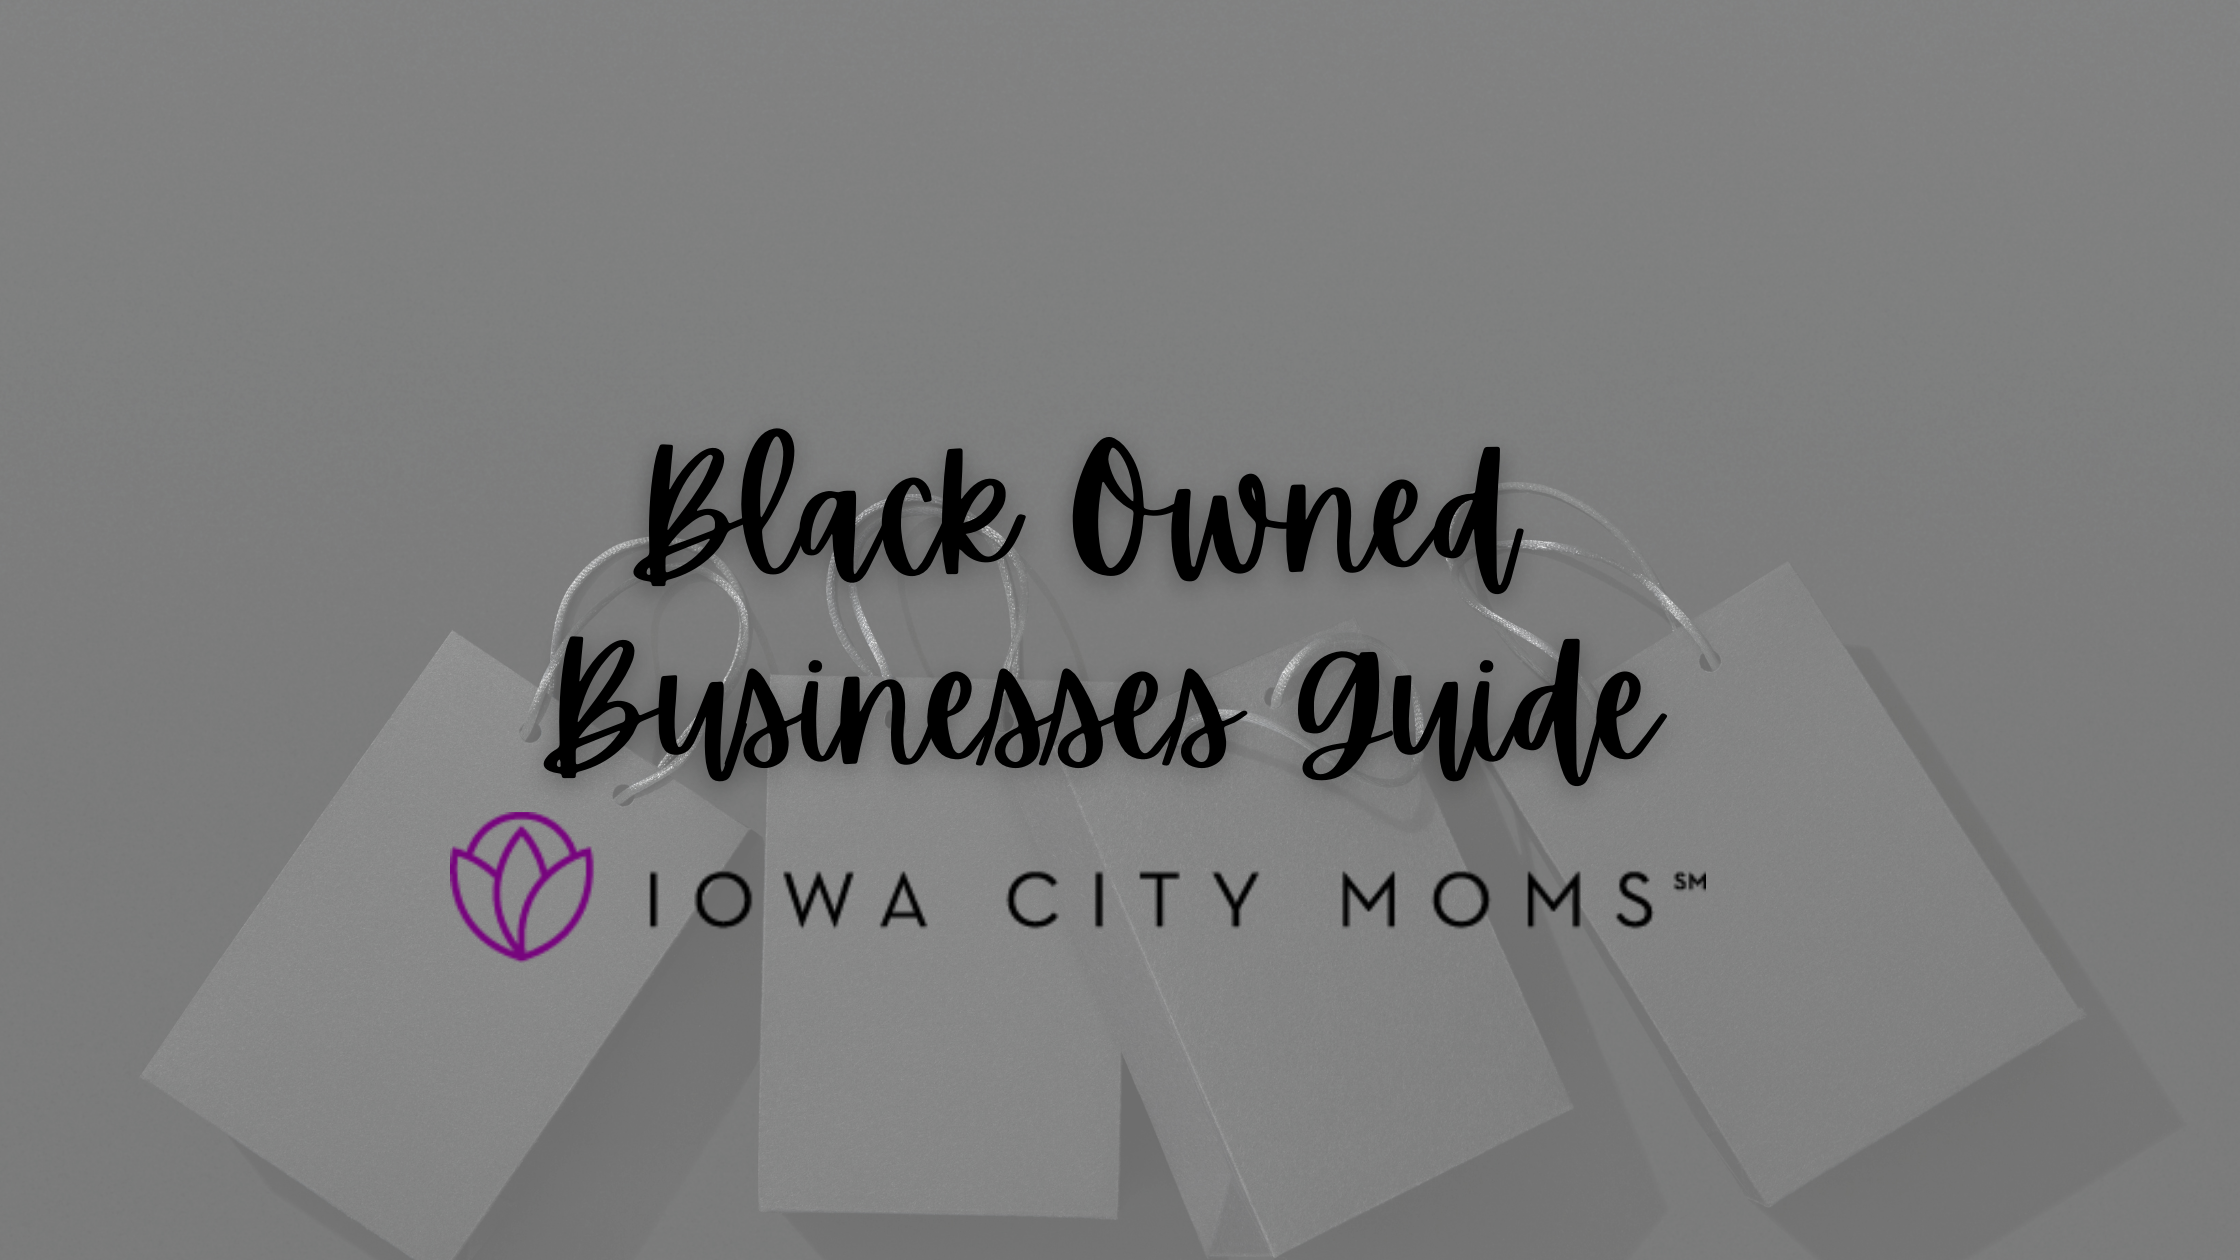 A graphic promoting Black Owned Businesses in the Iowa CIty Area